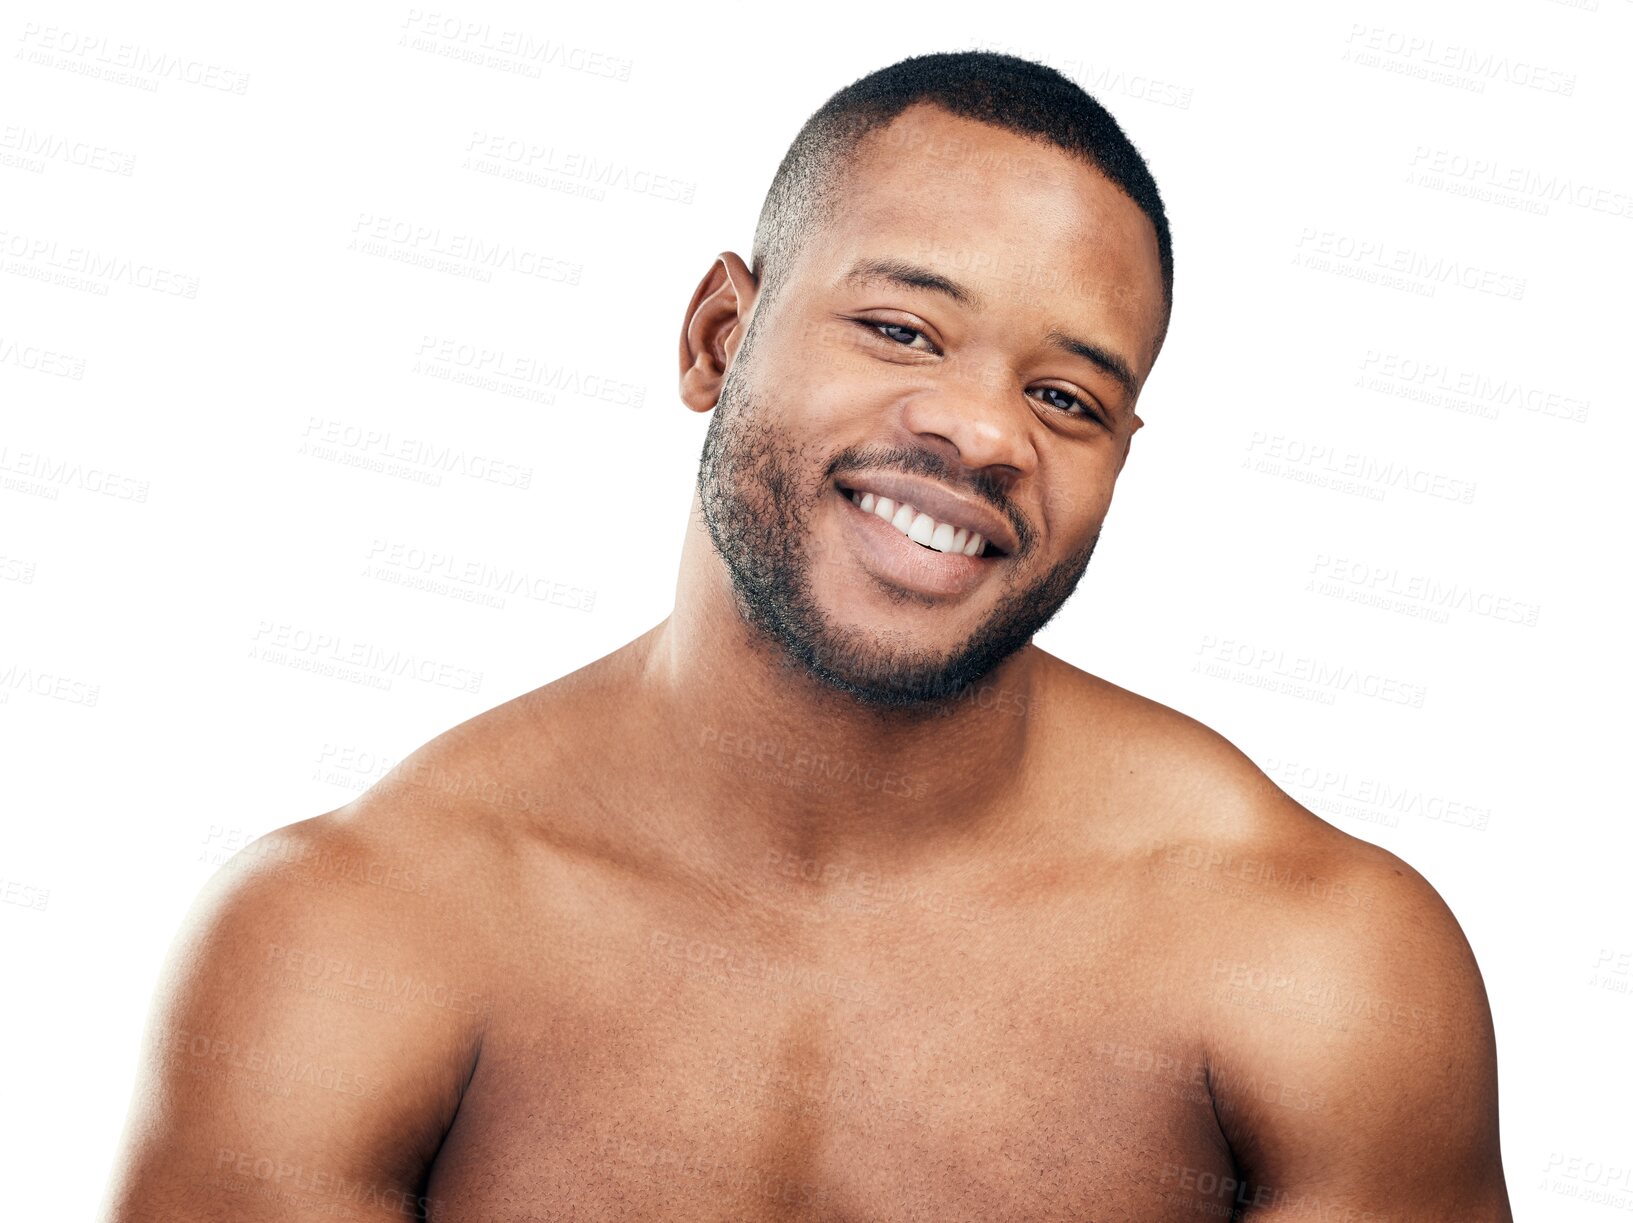 Buy stock photo Portrait, beauty or happy black man with natural skincare isolated on transparent png background. Healthy face, clean facial smile or African handsome male person with self love, glow or wellness 